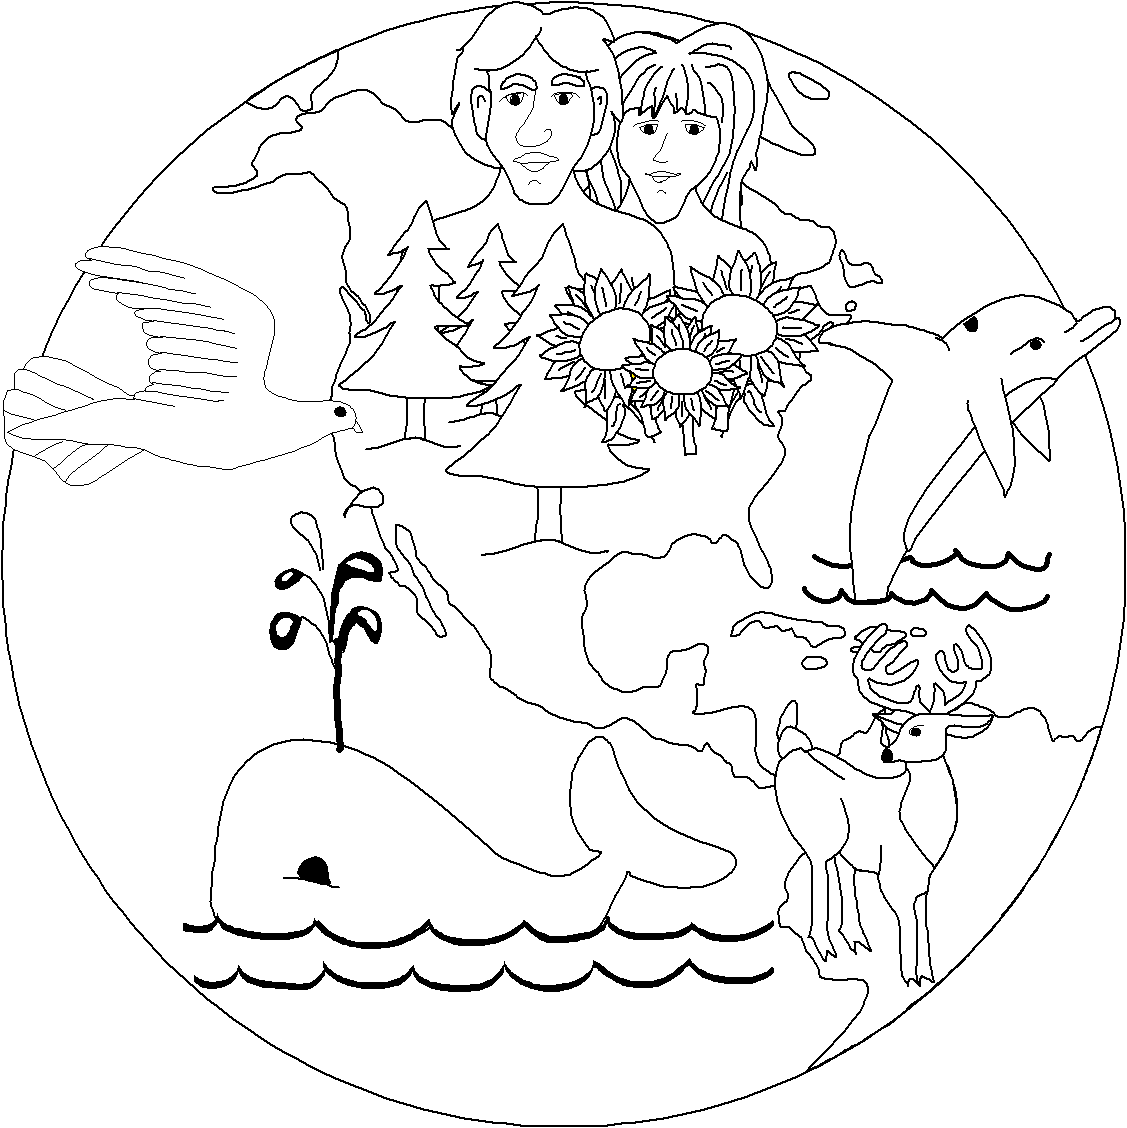 Creation coloring pages